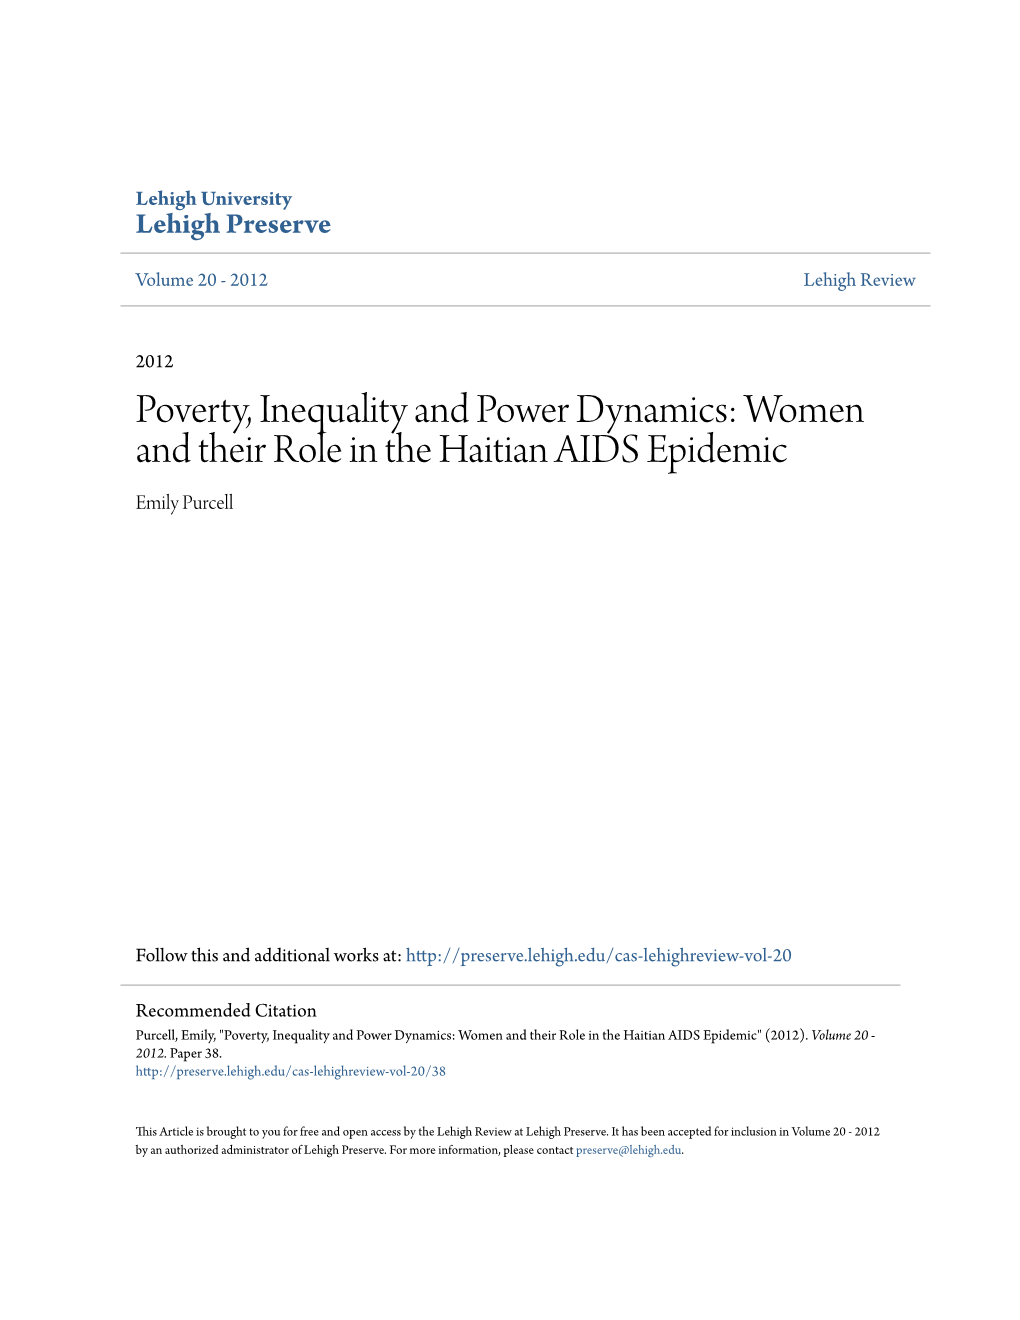 Women and Their Role in the Haitian AIDS Epidemic Emily Purcell